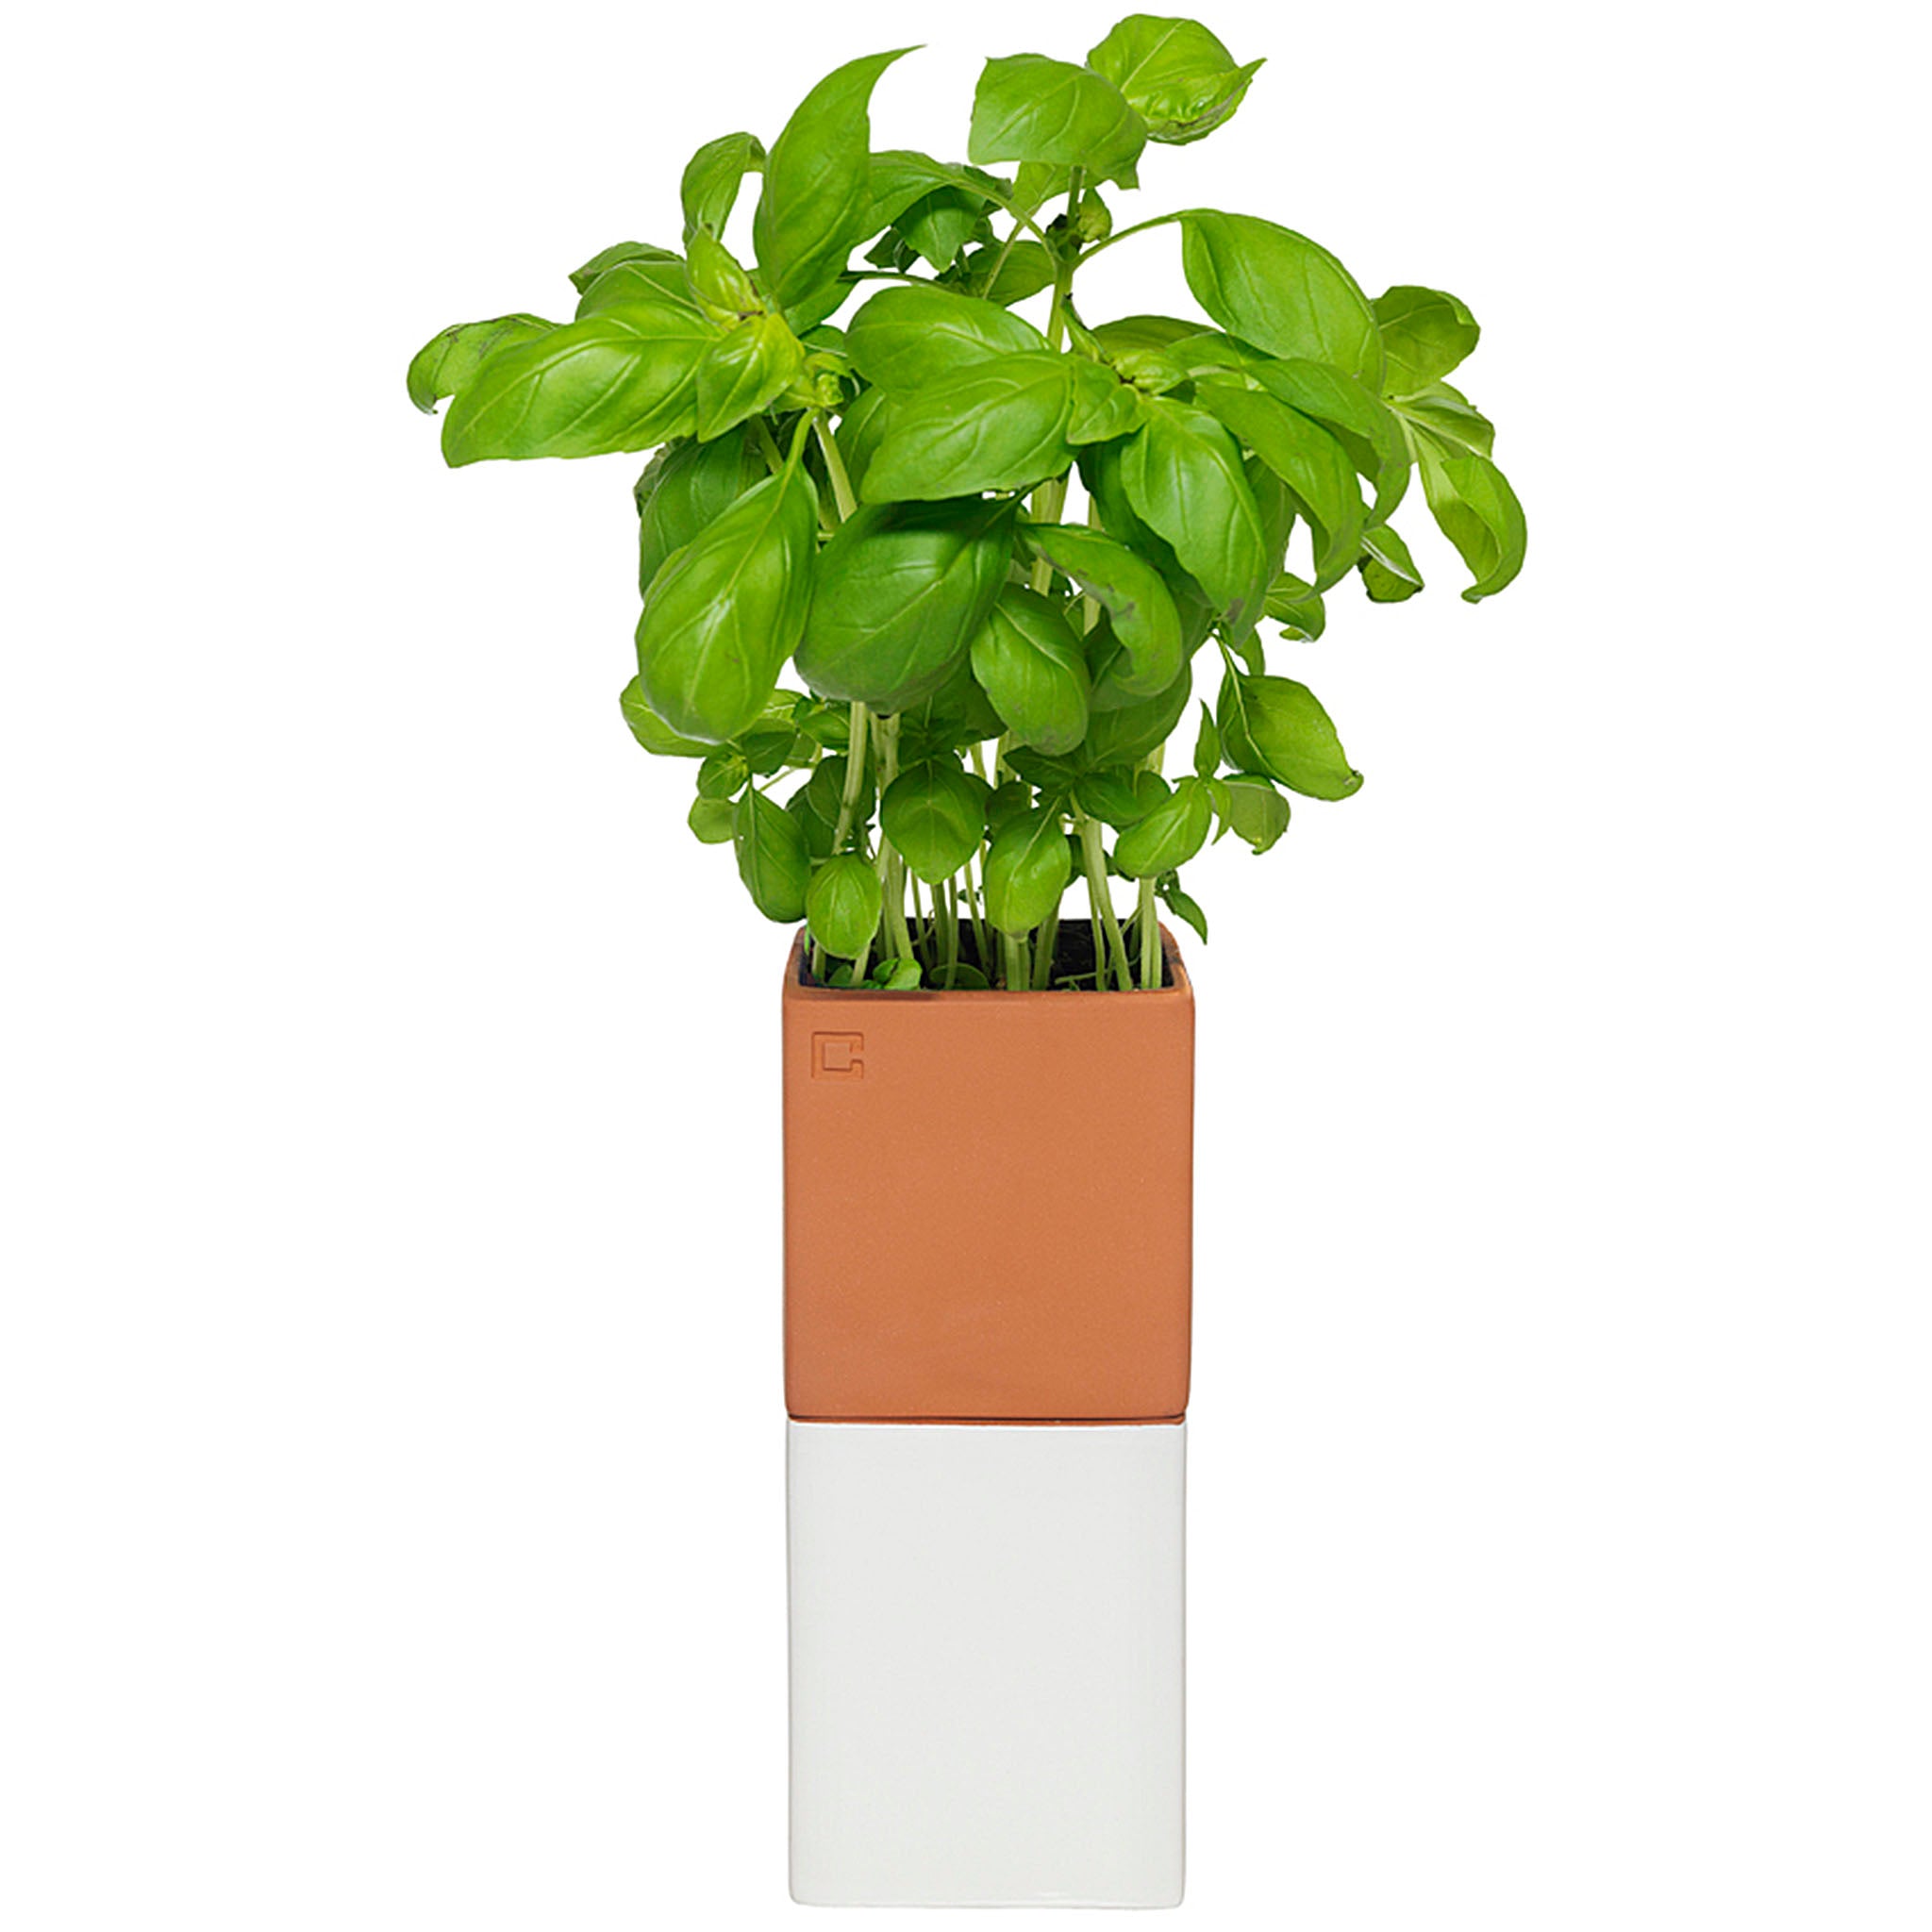 Evergreen Herb Pot is a sleek double-tiered planter that combines a modern look with a modern idea: a self-watering system.